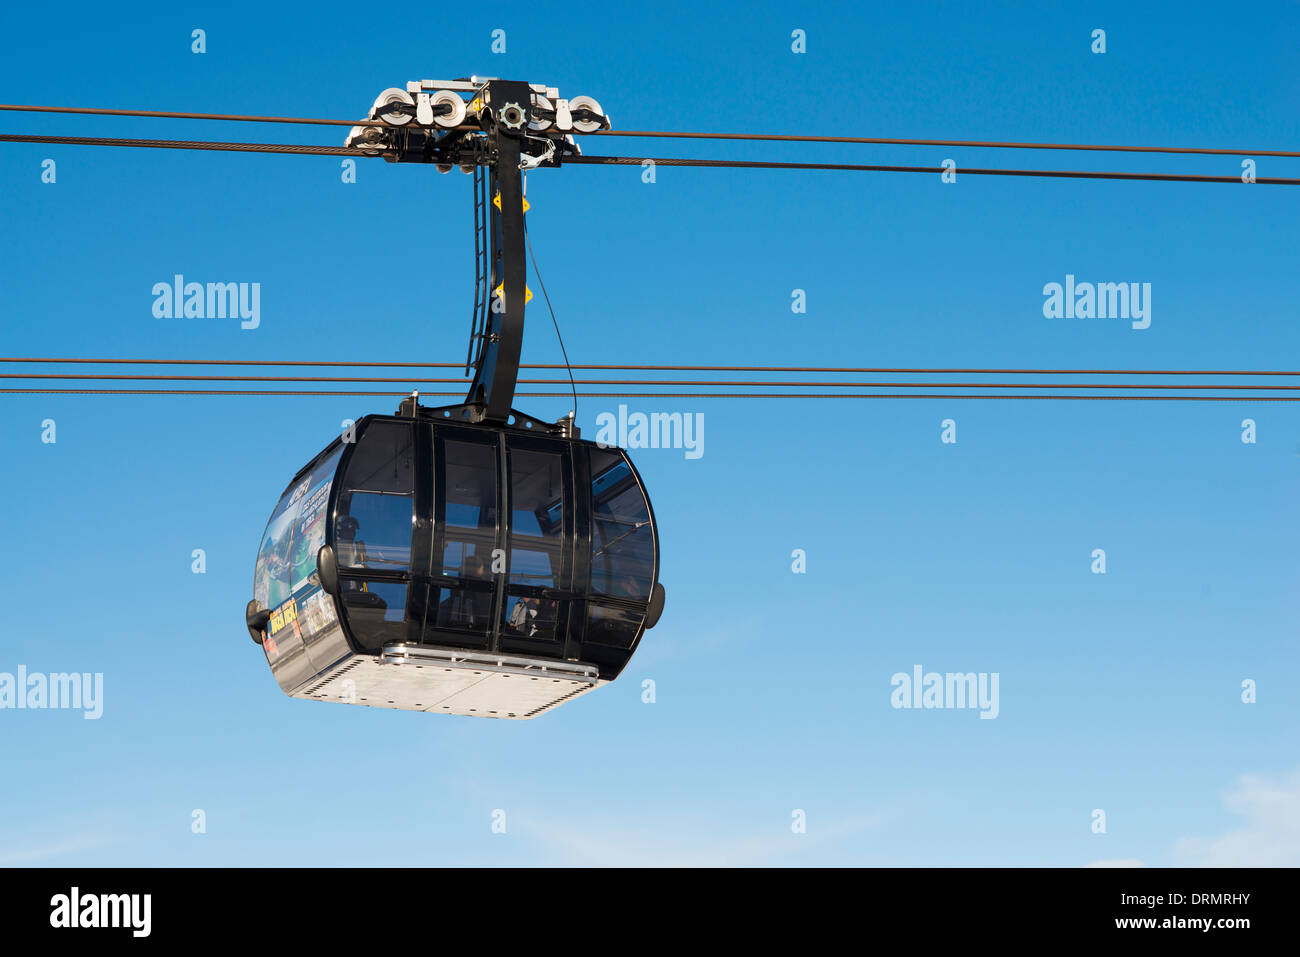 Cable car transporting skiers Stock Photo